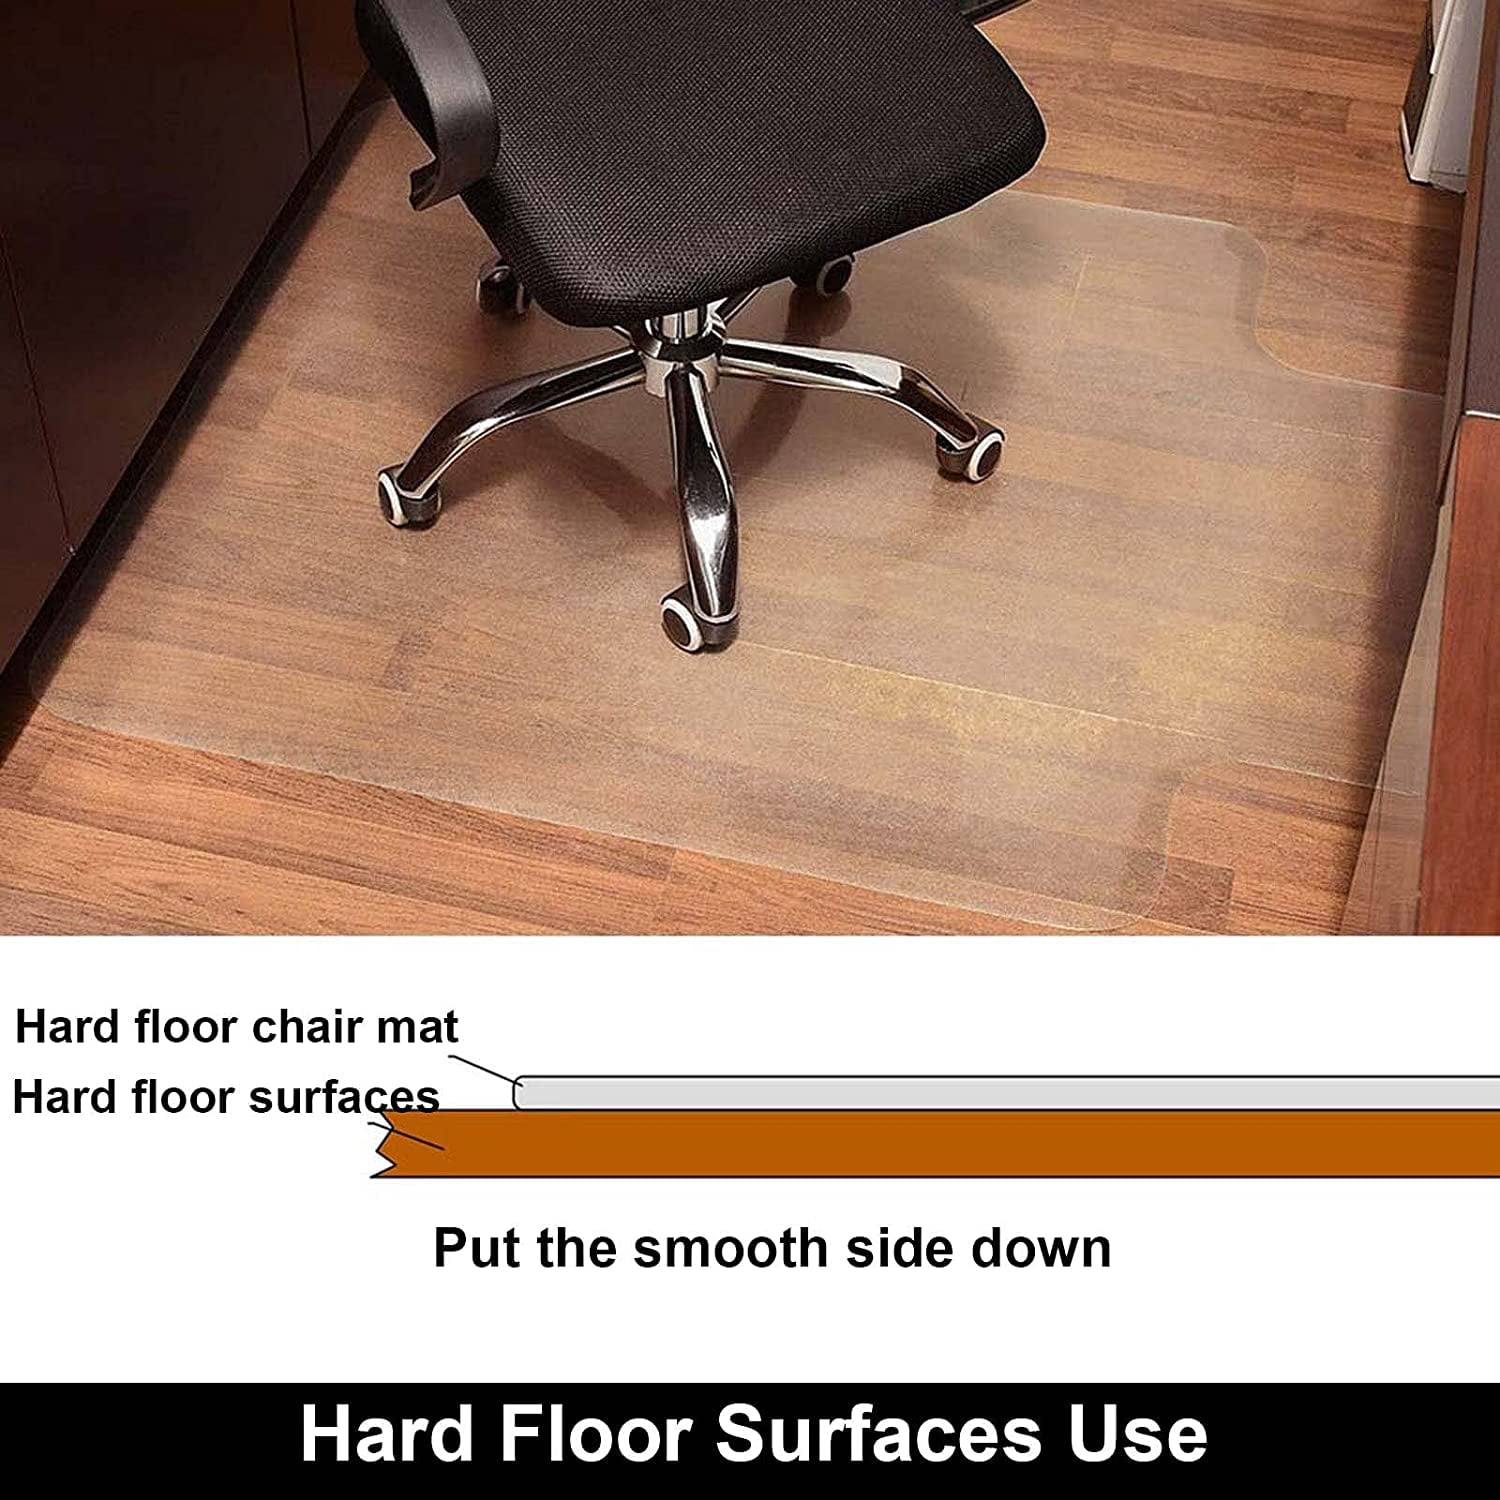 SOUNDANCE Chair Mat for Hardwood Floor 1/8’’ Thick Hard Sturdy Smooth Heavy Duty Delivered Flat 36’’ X 48’’ with Lip Highly Quality Protector for Office PC Under Desk Computer Gaming Rolling Chair 